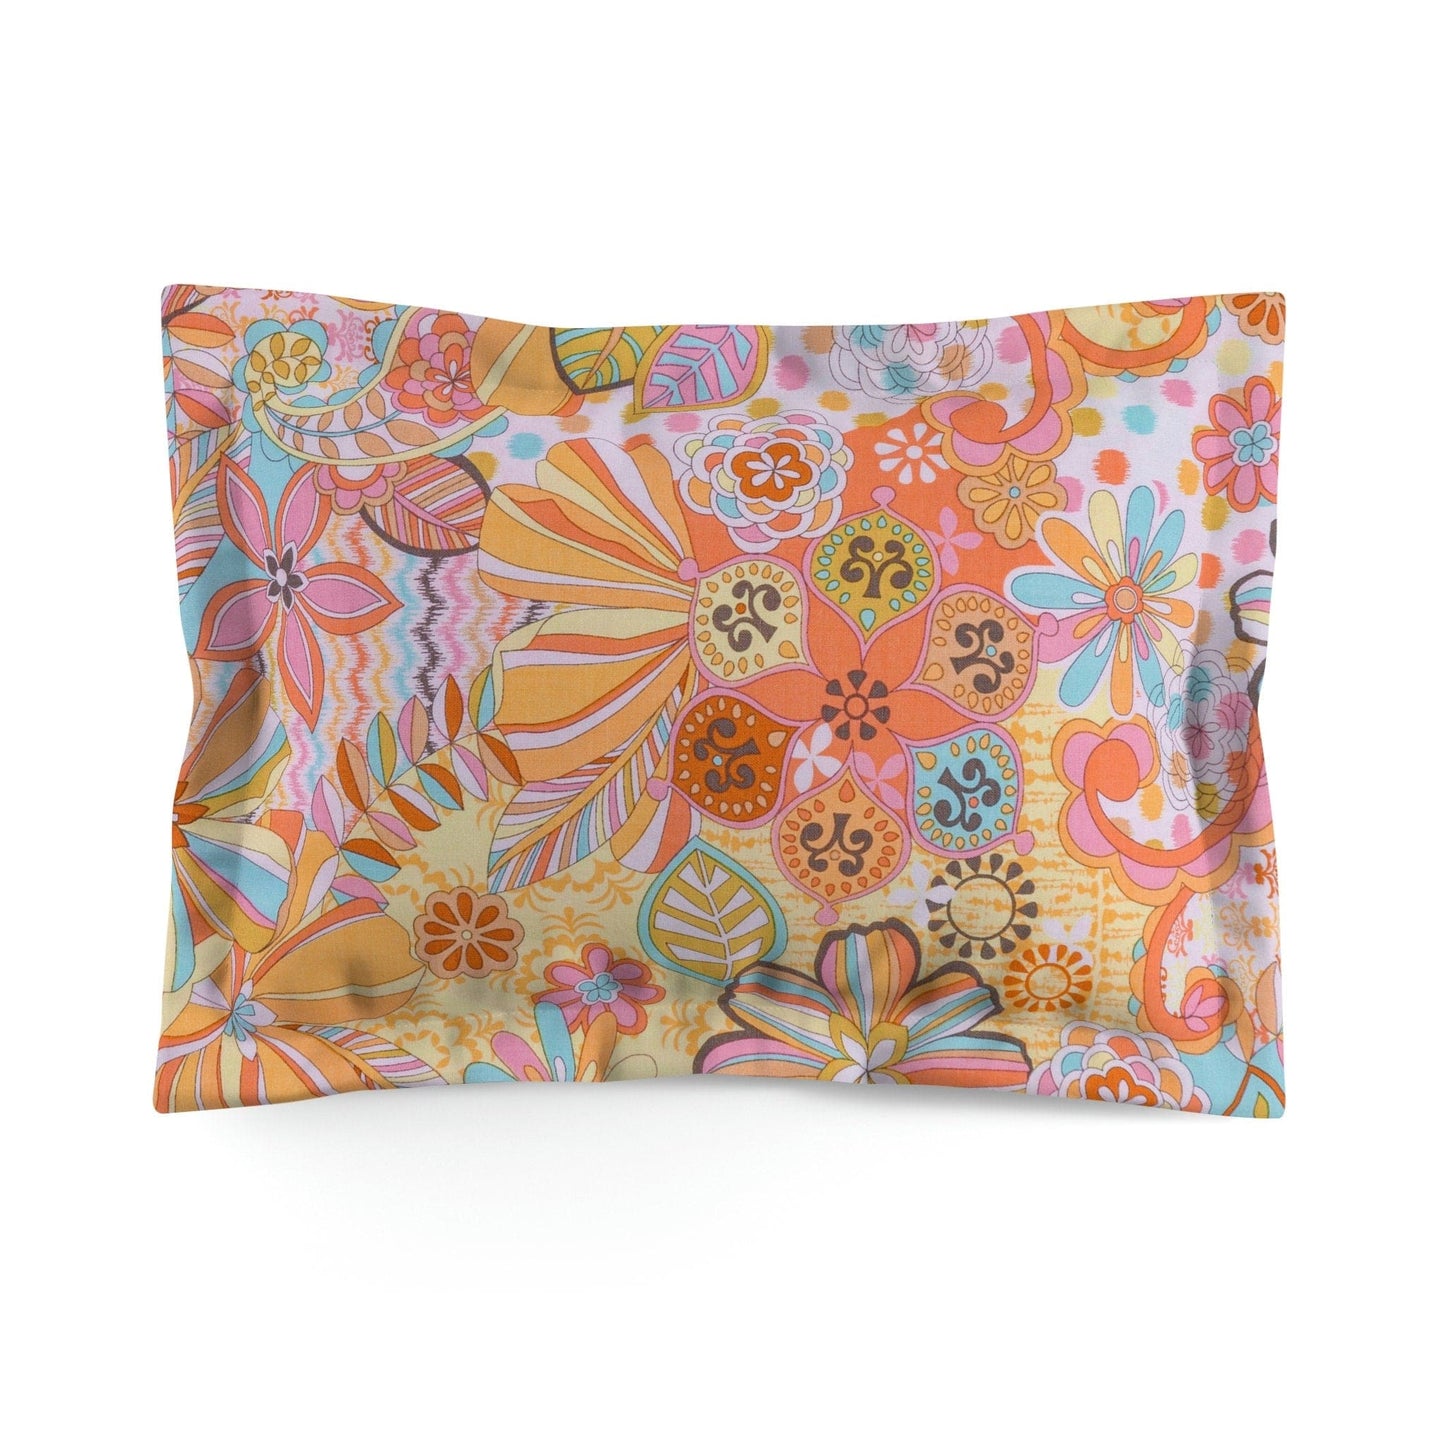 Kate McEnroe New York Retro Trippy Flower Power Pillow Sham, 70s Mid Mod Hippie Chic Floral Bedroom Decor with Groovy Orange, Yellow, and Blue Palette Pillow Shams